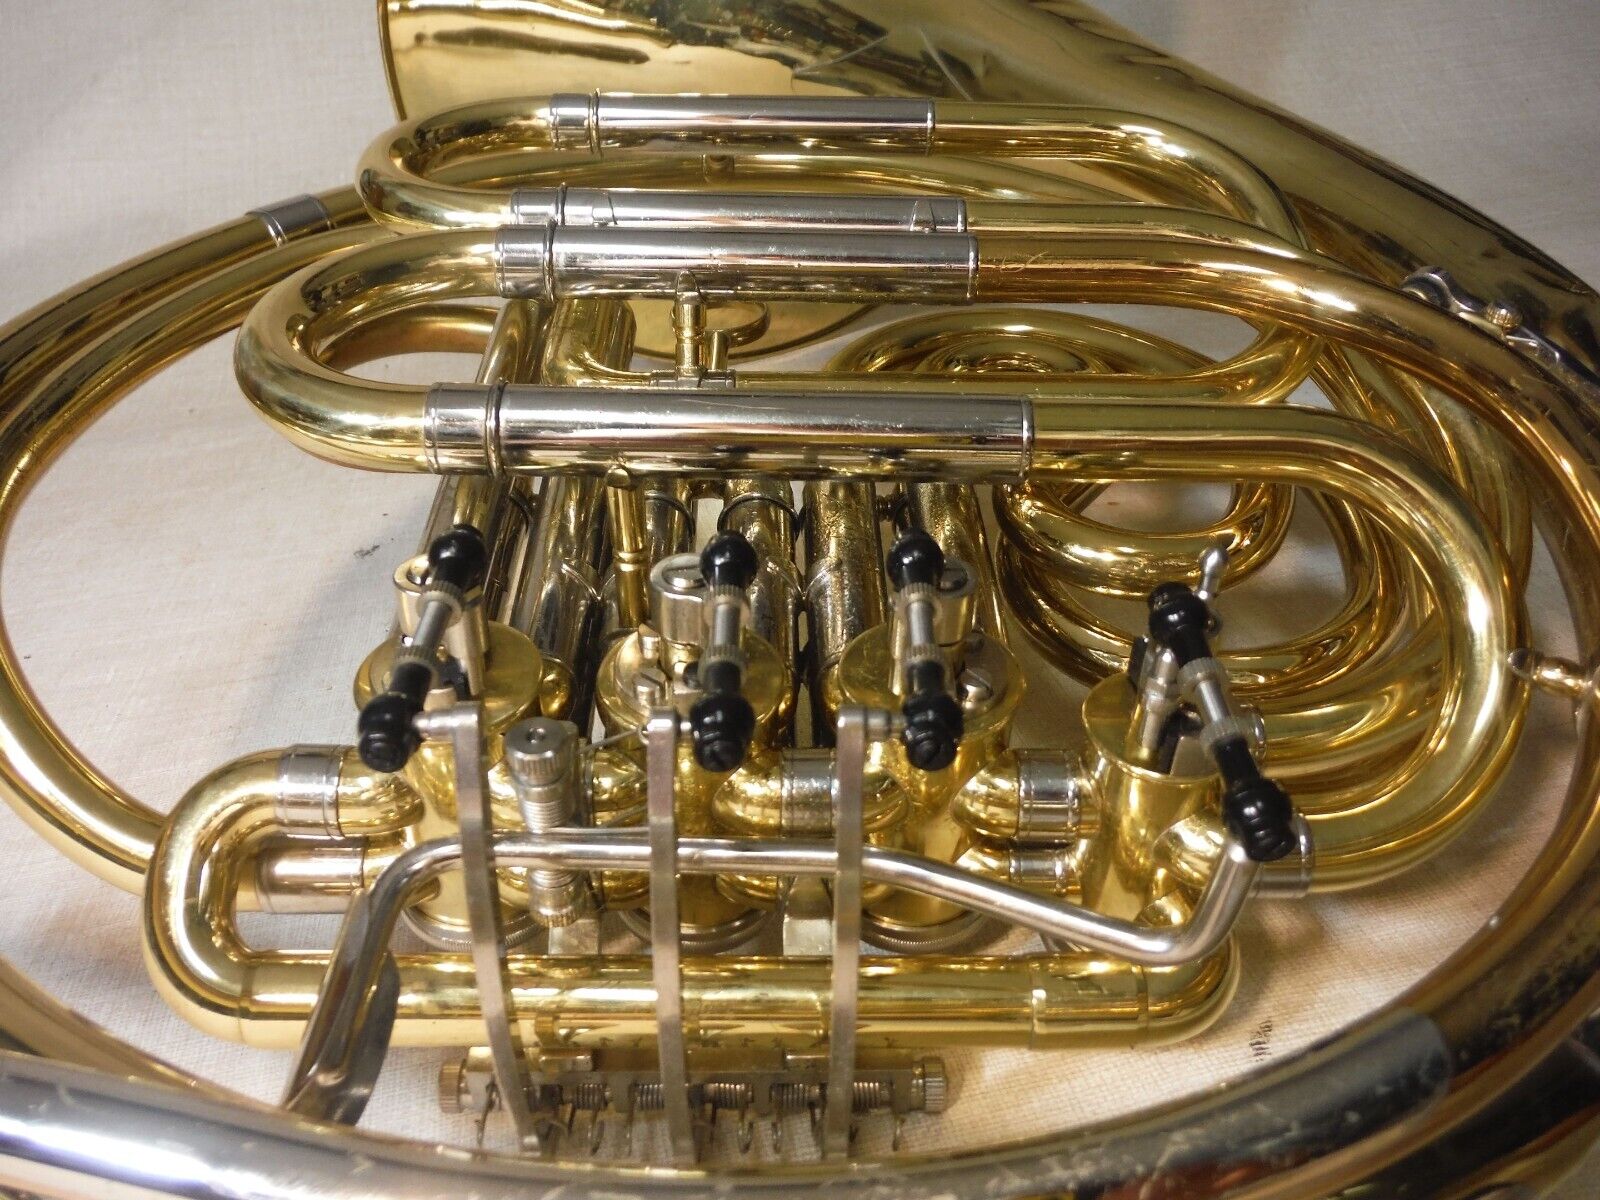 JUPITER JHR-852 DOUBLE FRENCH HORN BRASS WORKING GOOD W/DENTS CASE MOUTHPIECE 20